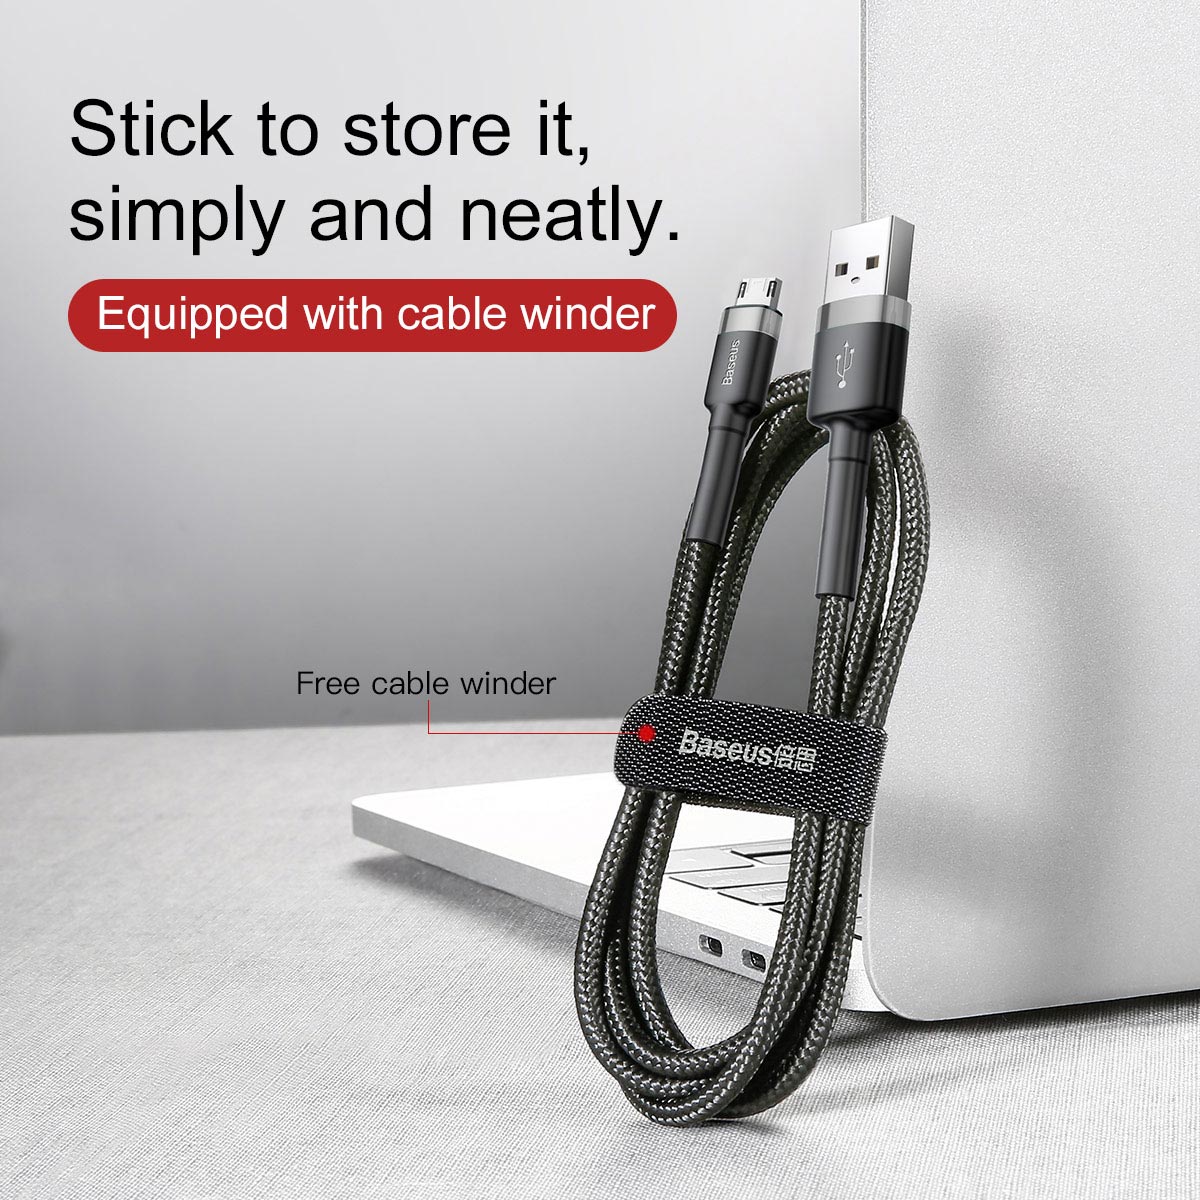 BASEUS 1M Micro USB Cable (2.4A) | Cafule Series Fast Charging Cable